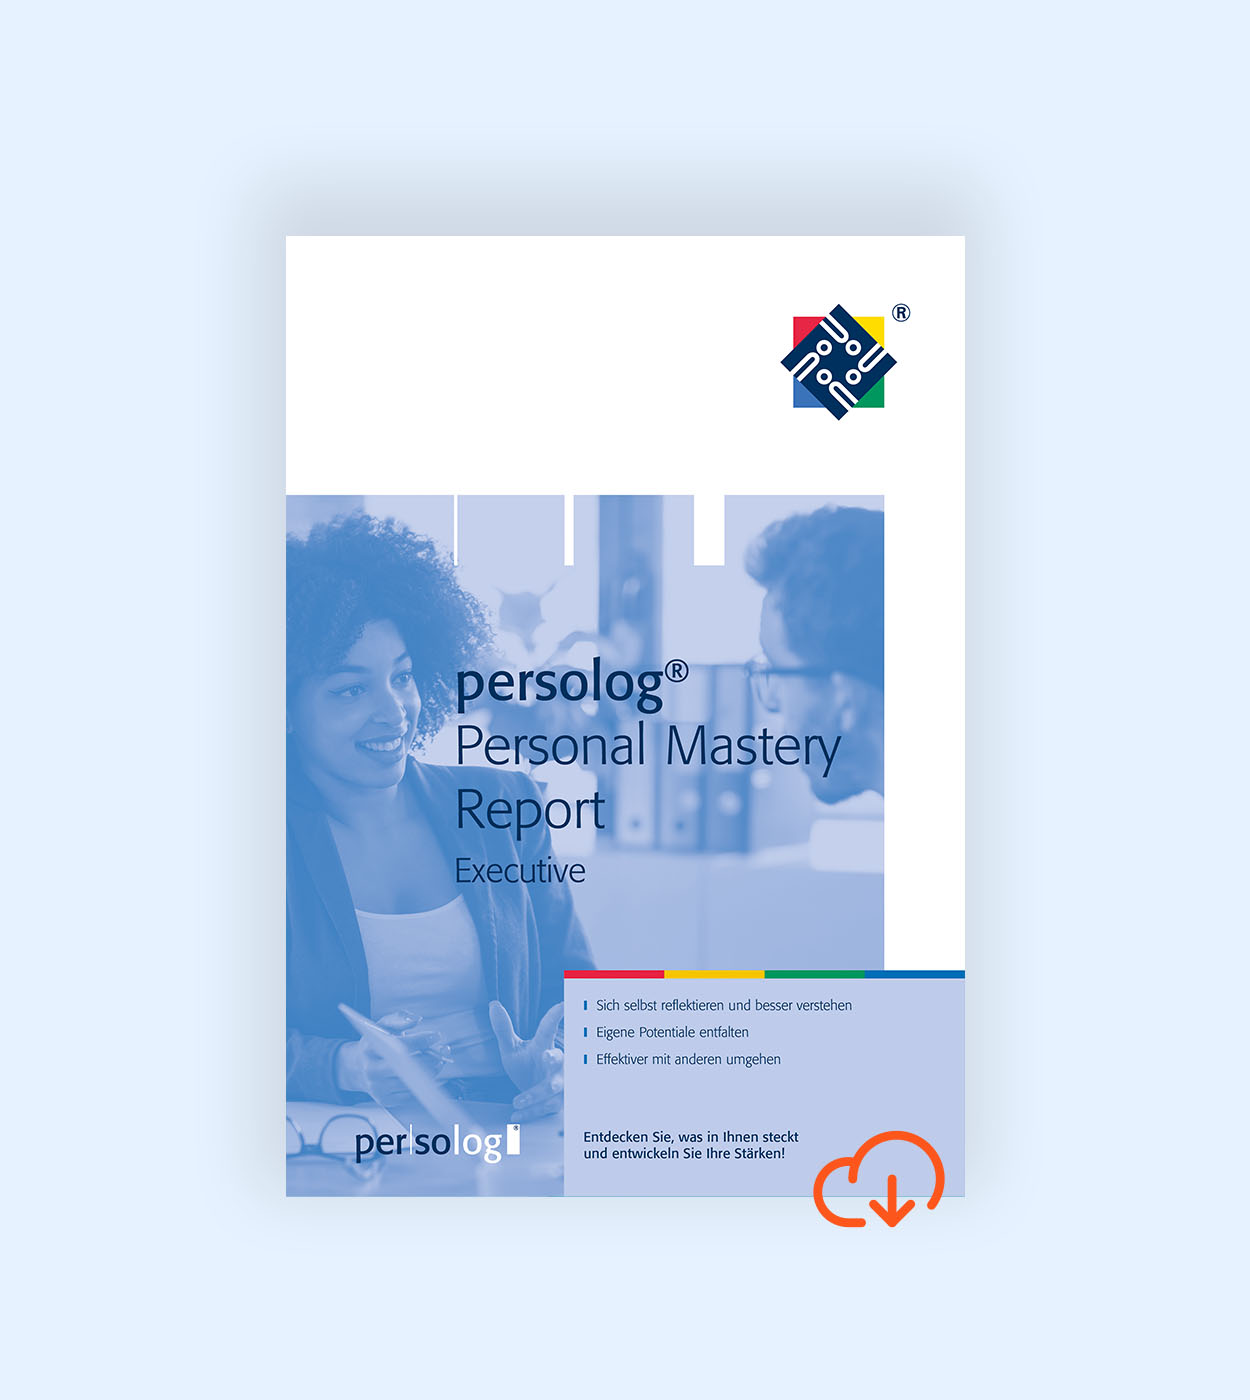 persolog® Personal Mastery Report Executive online